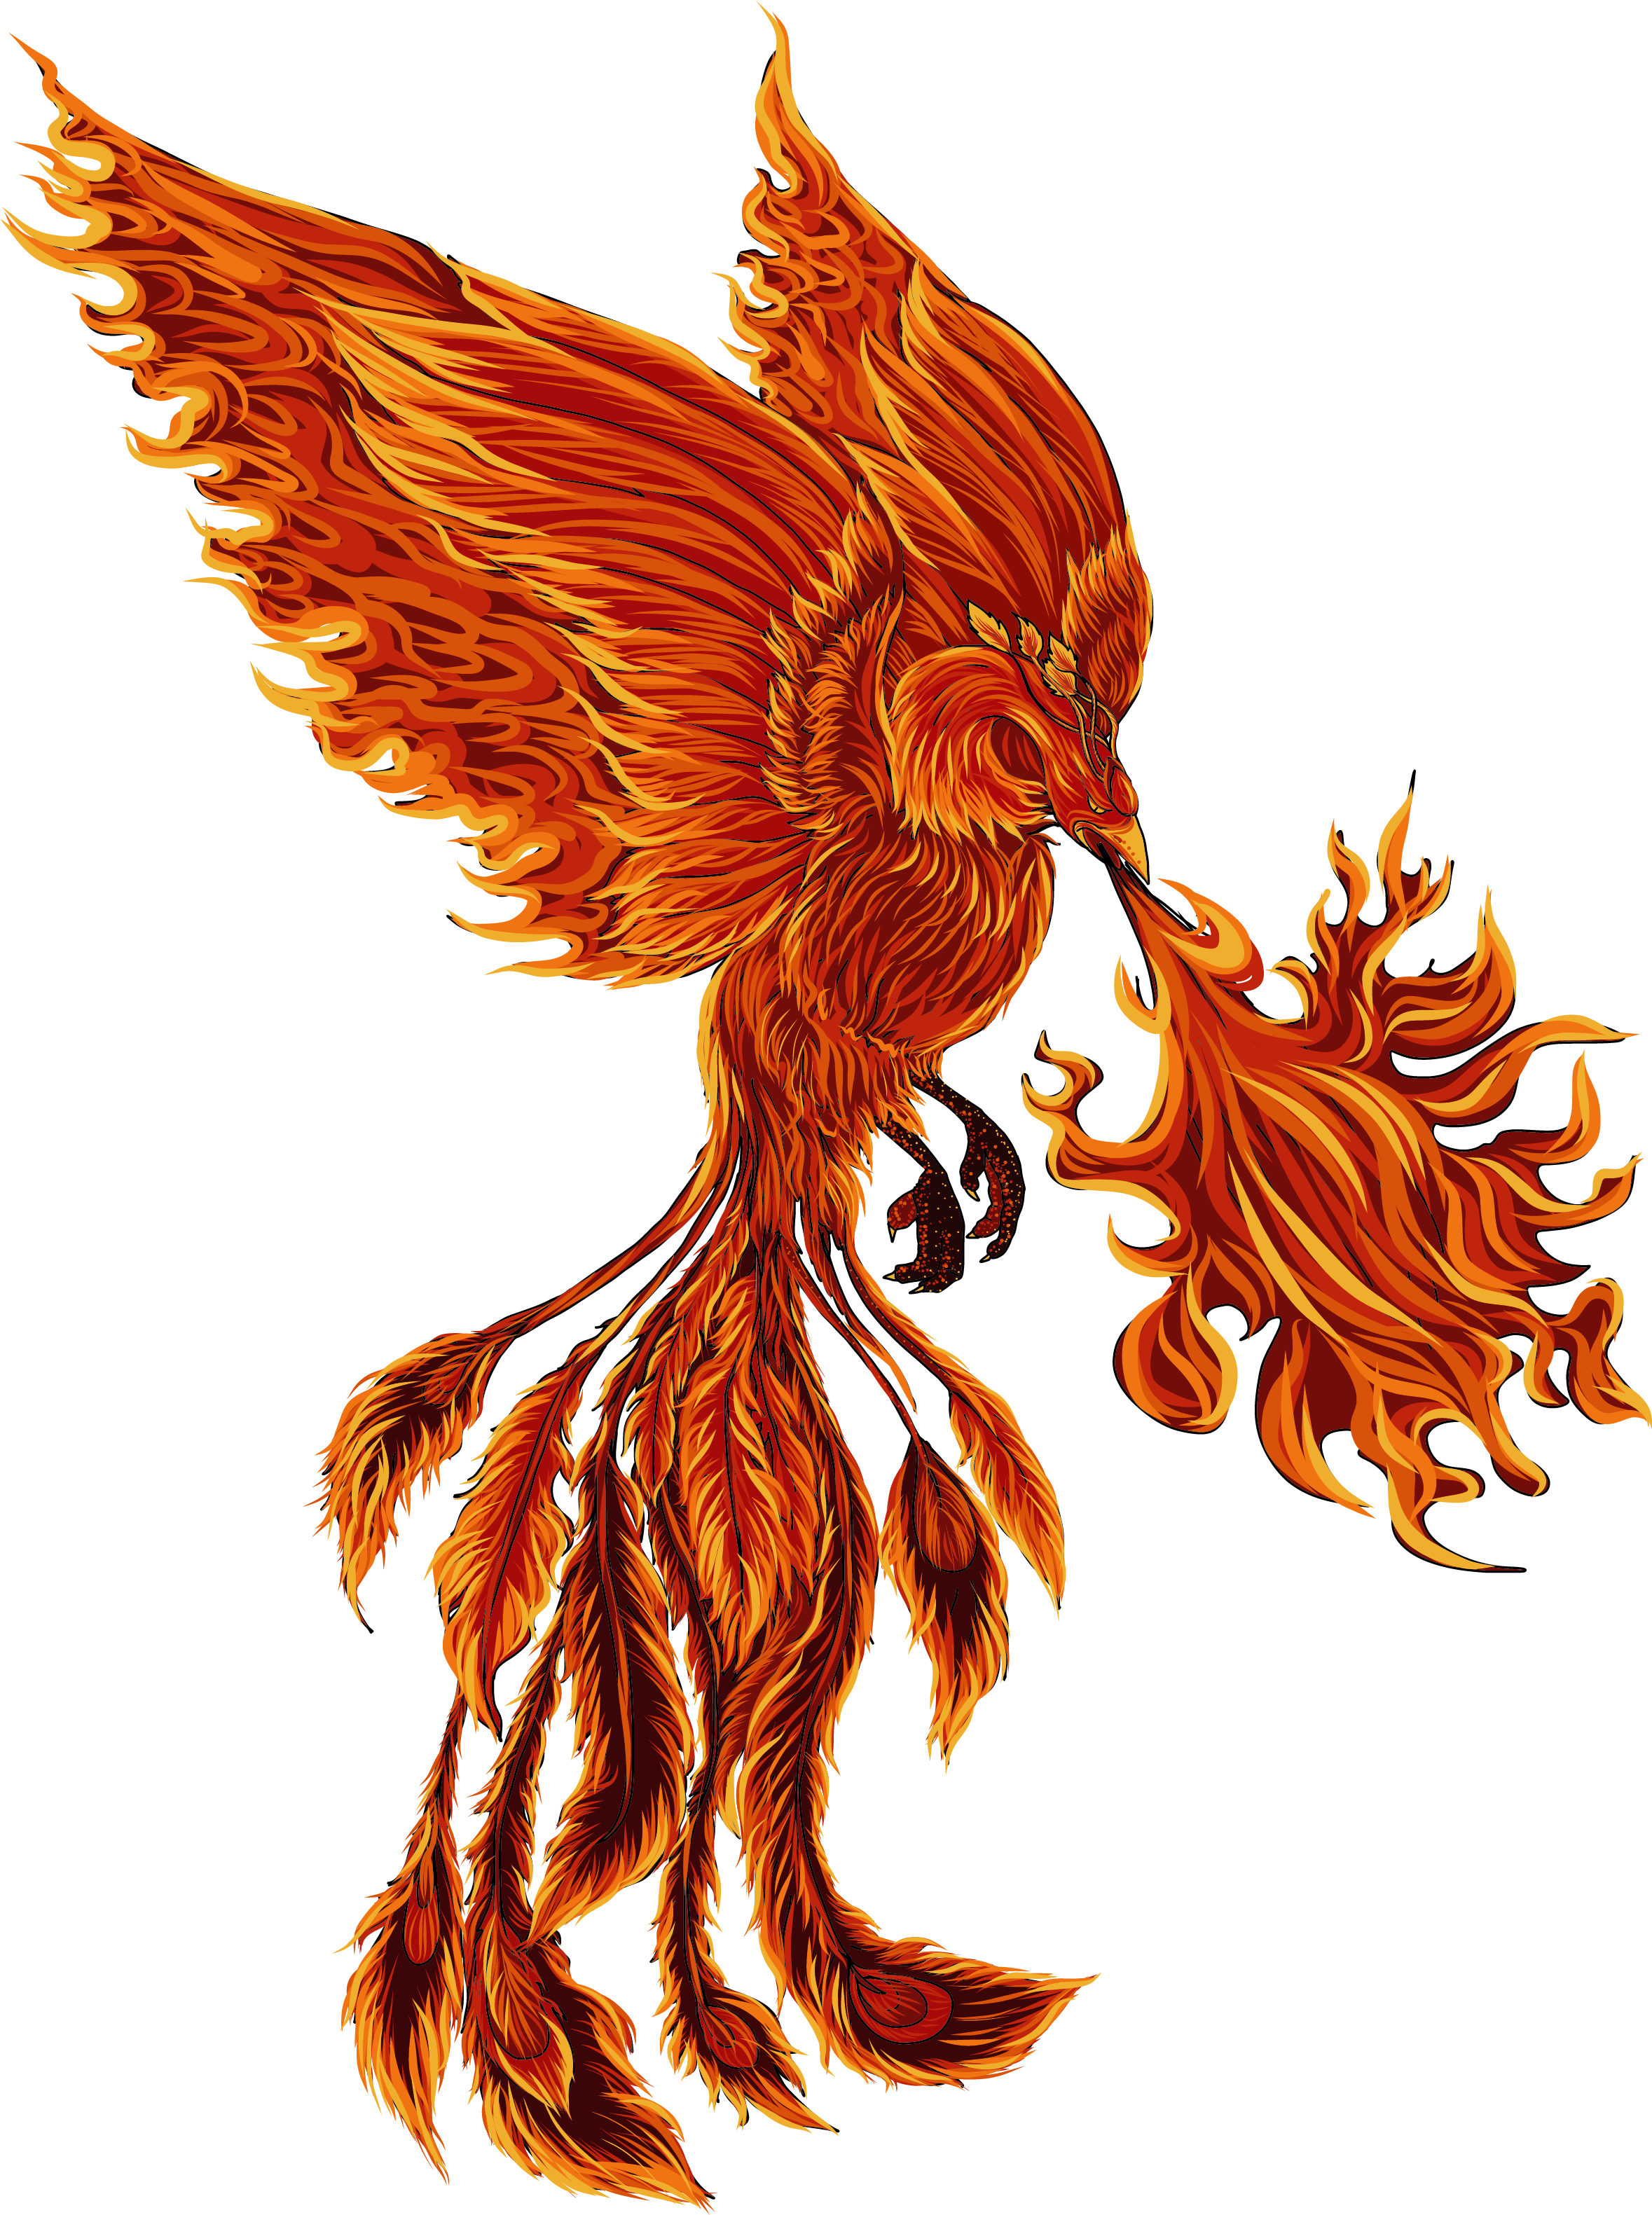 illustration of a phoenix-like creature with red and orange plumage breathing fire